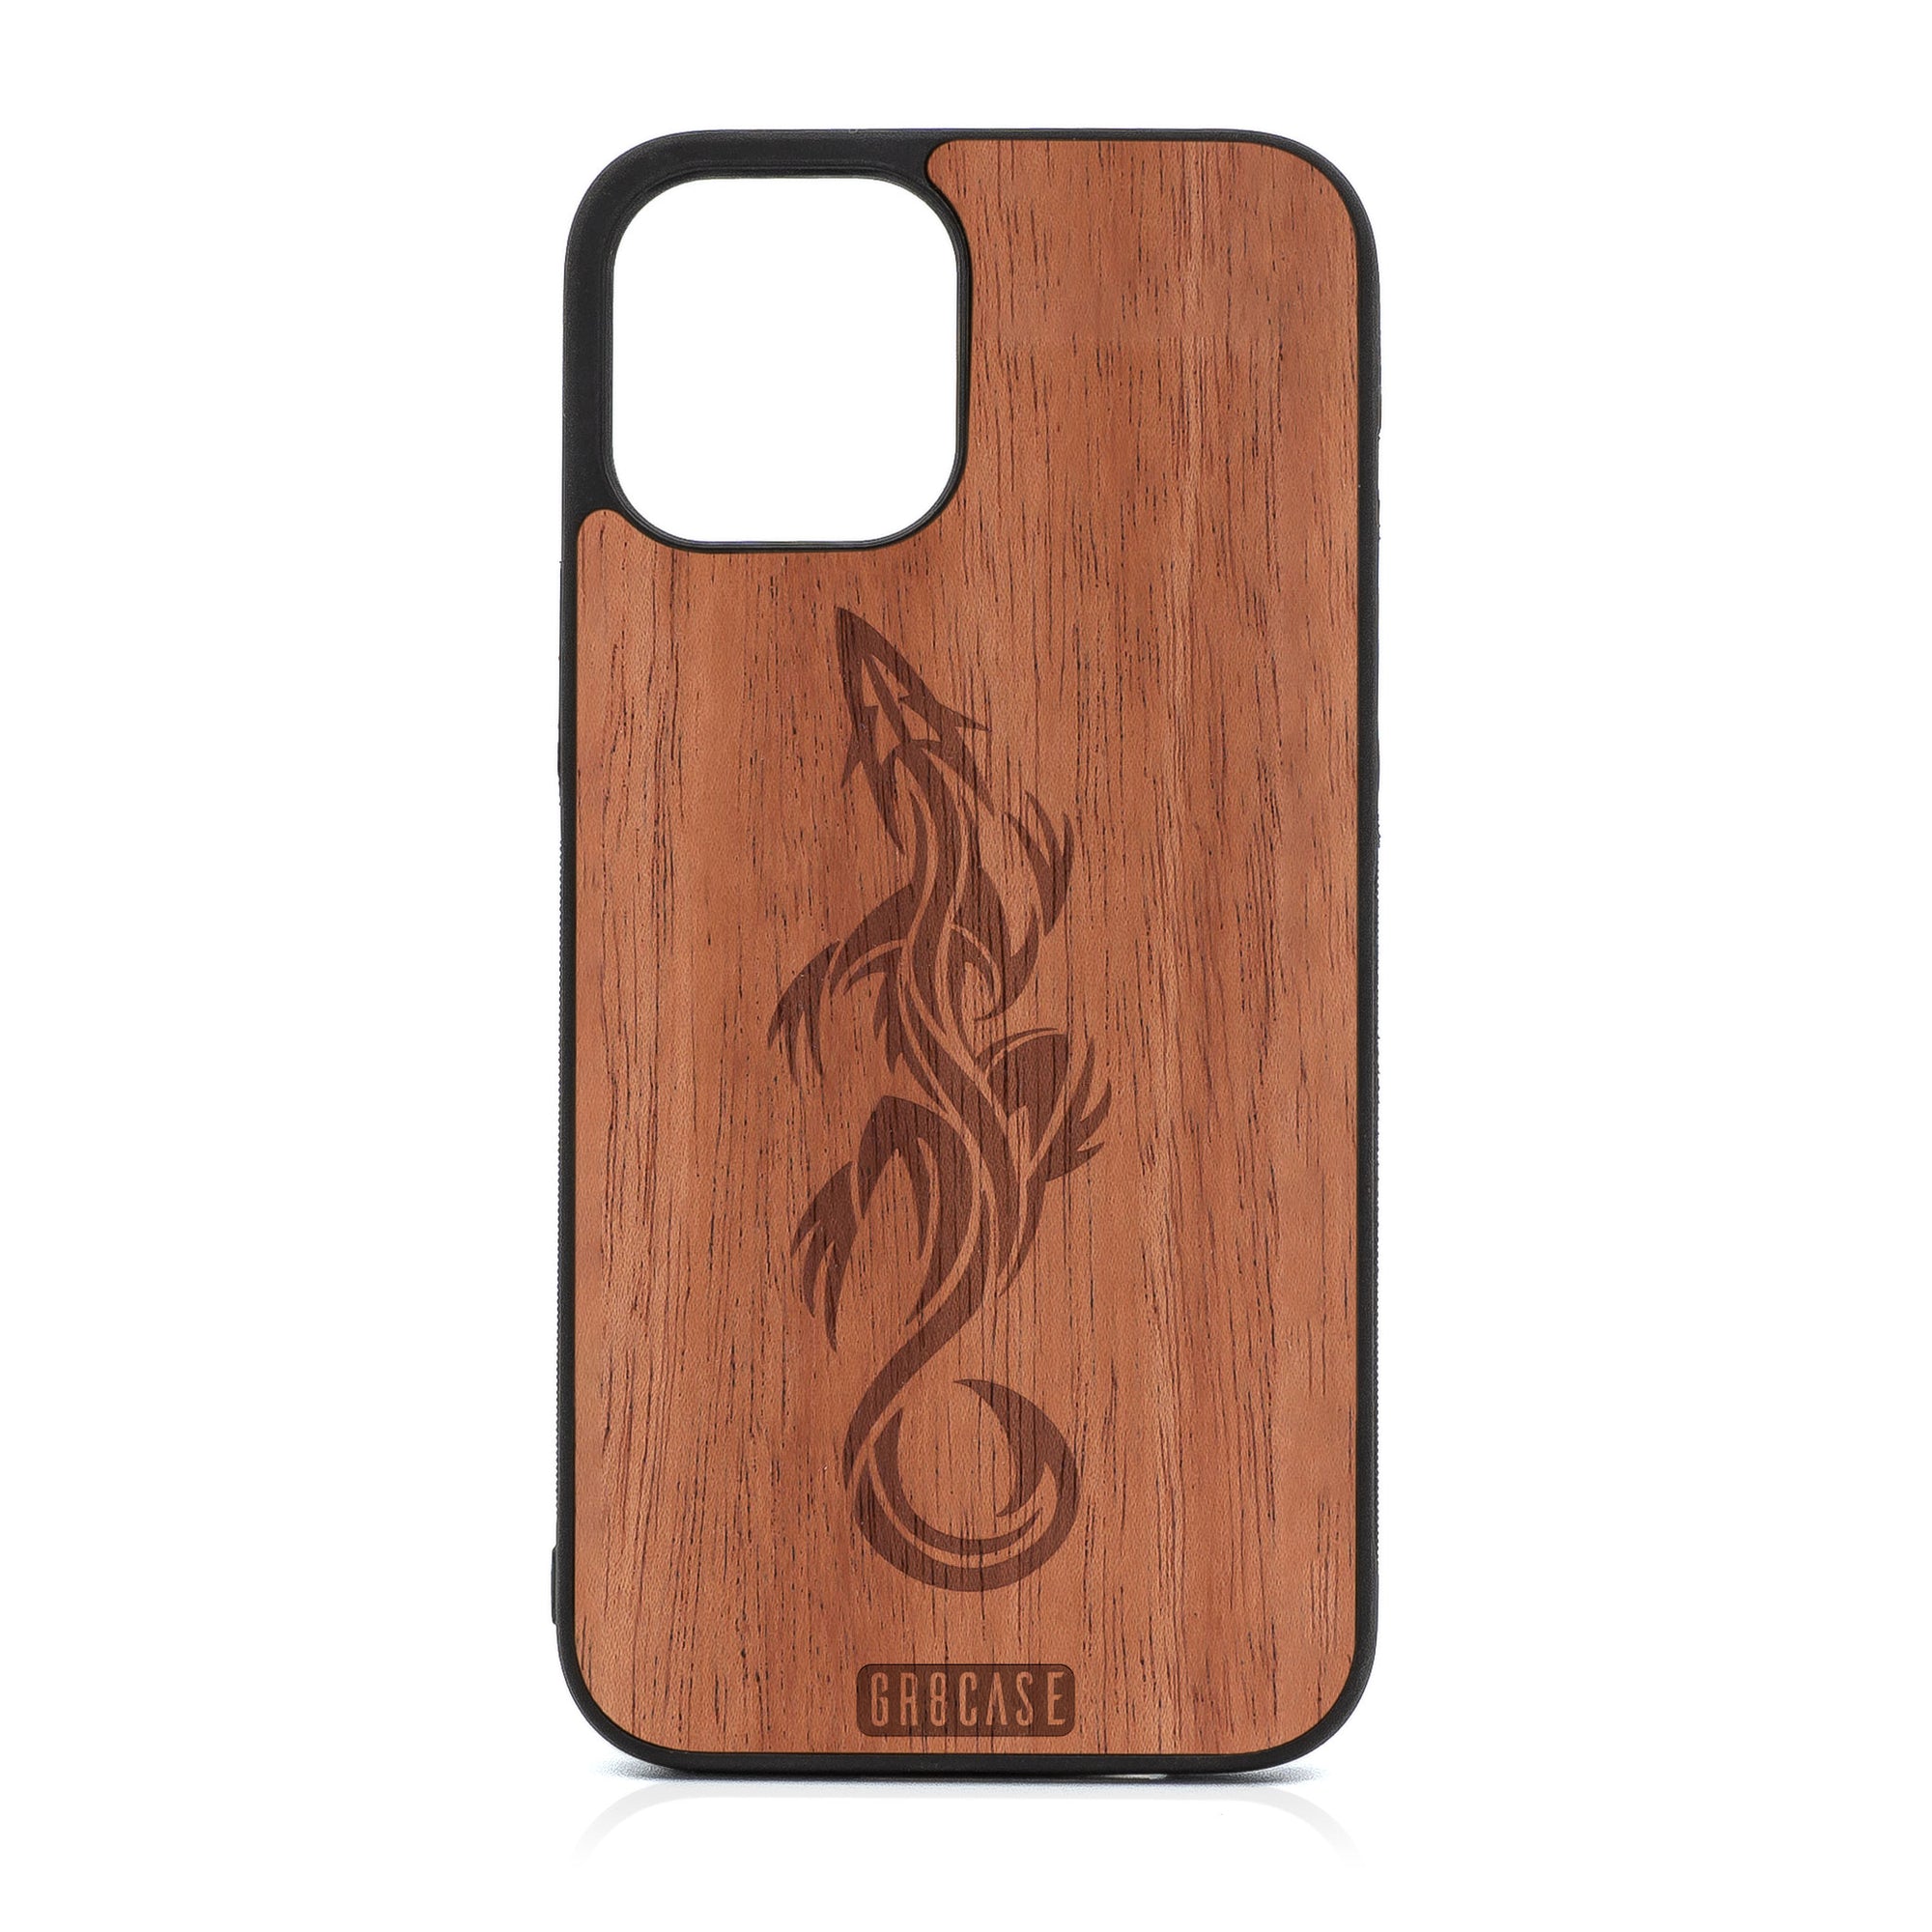 Lizard Design Wood Case For iPhone 12 Pro Max